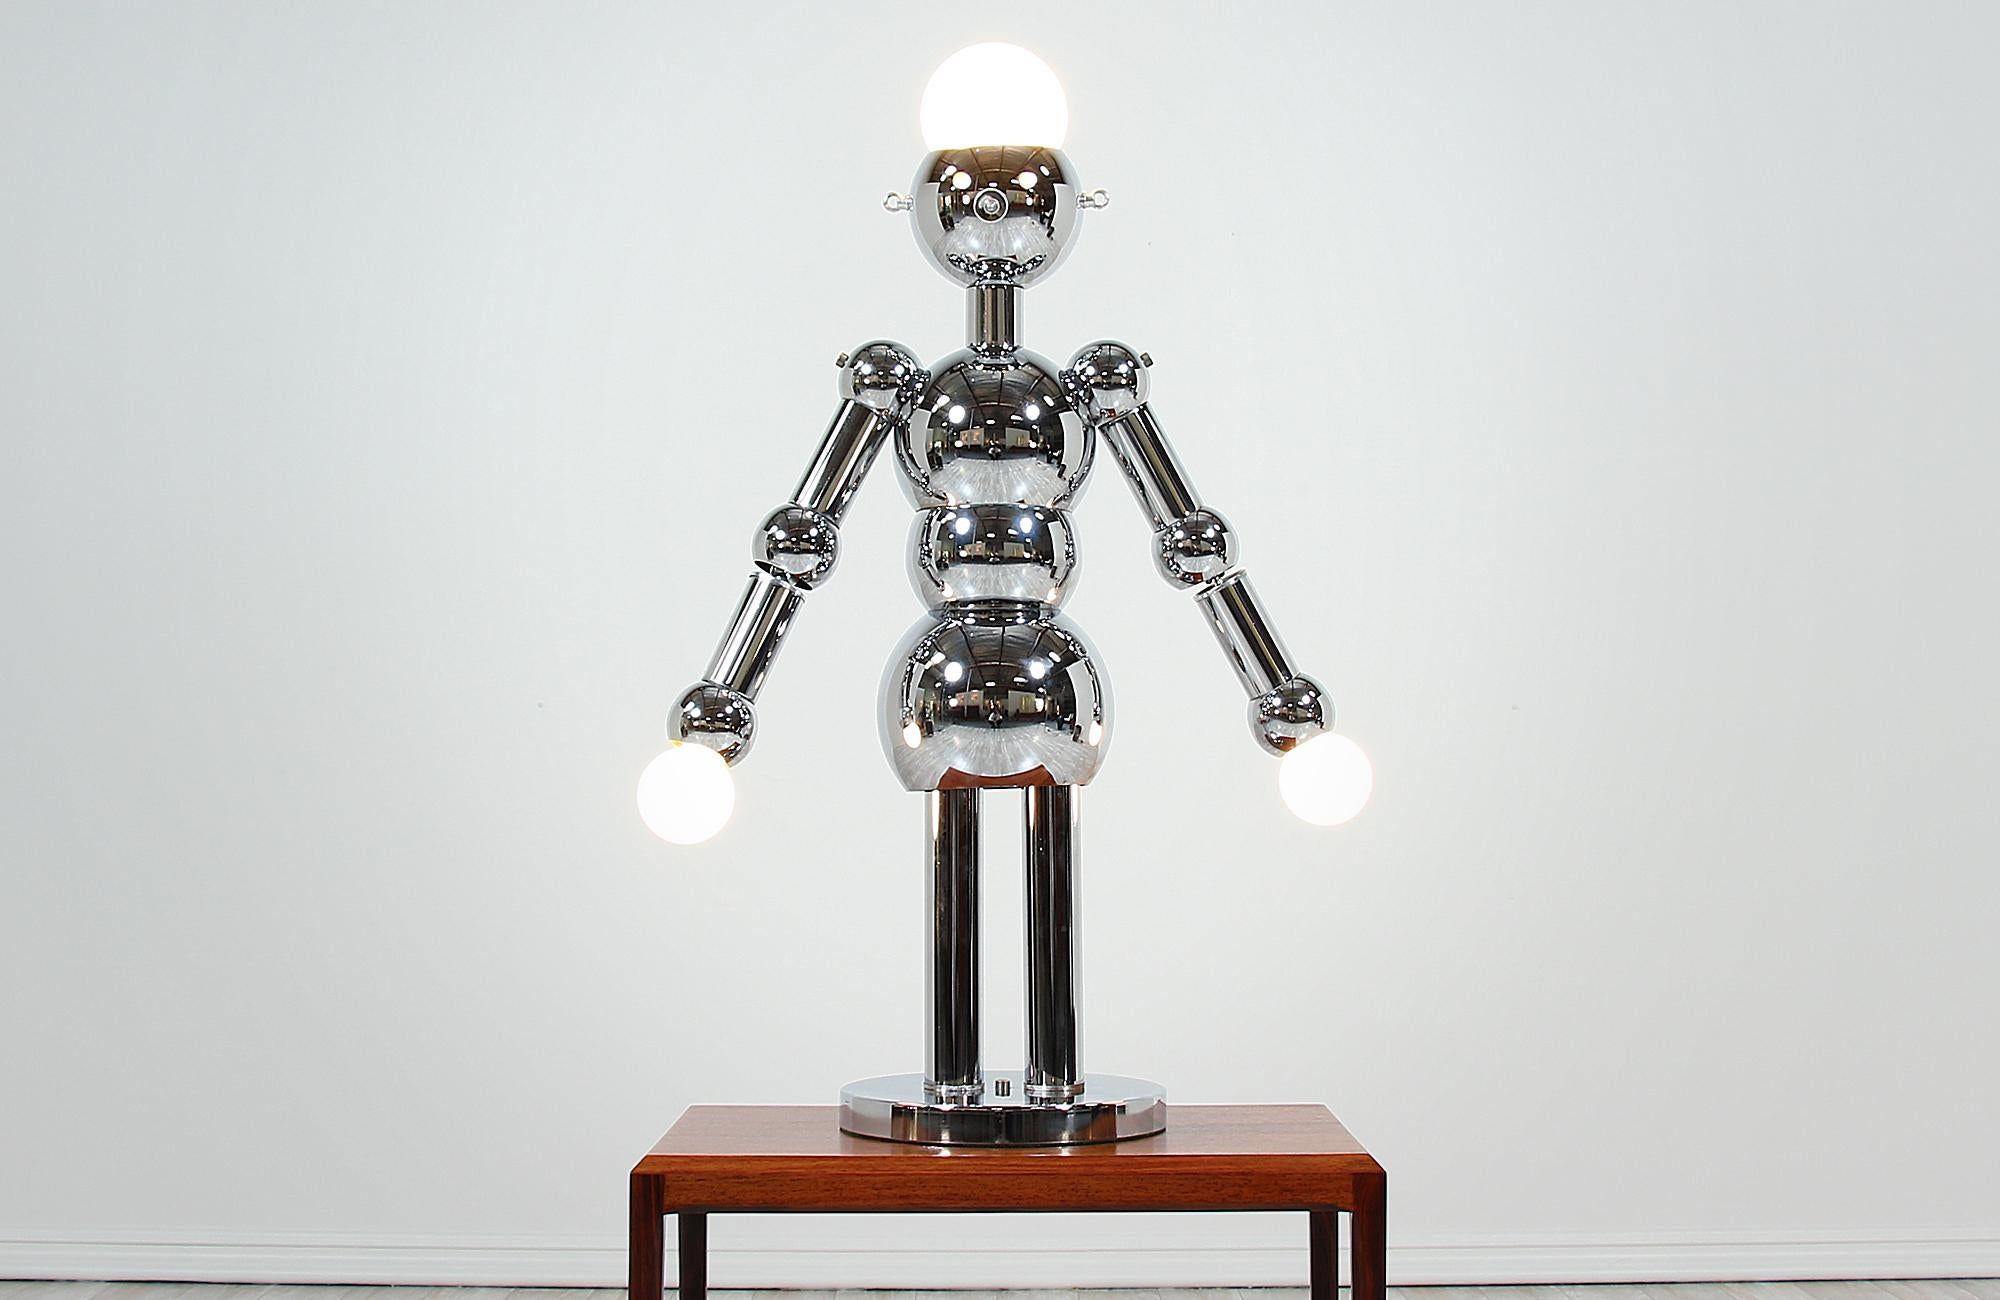 Unique robot lamp designed and manufactured by Torino Lamps Co. in Italy, circa 1970s. This artistic lamp is made of chrome steel that was recently polished. The lamp is turned on/off using the switch that duals as the nose. Three light settings